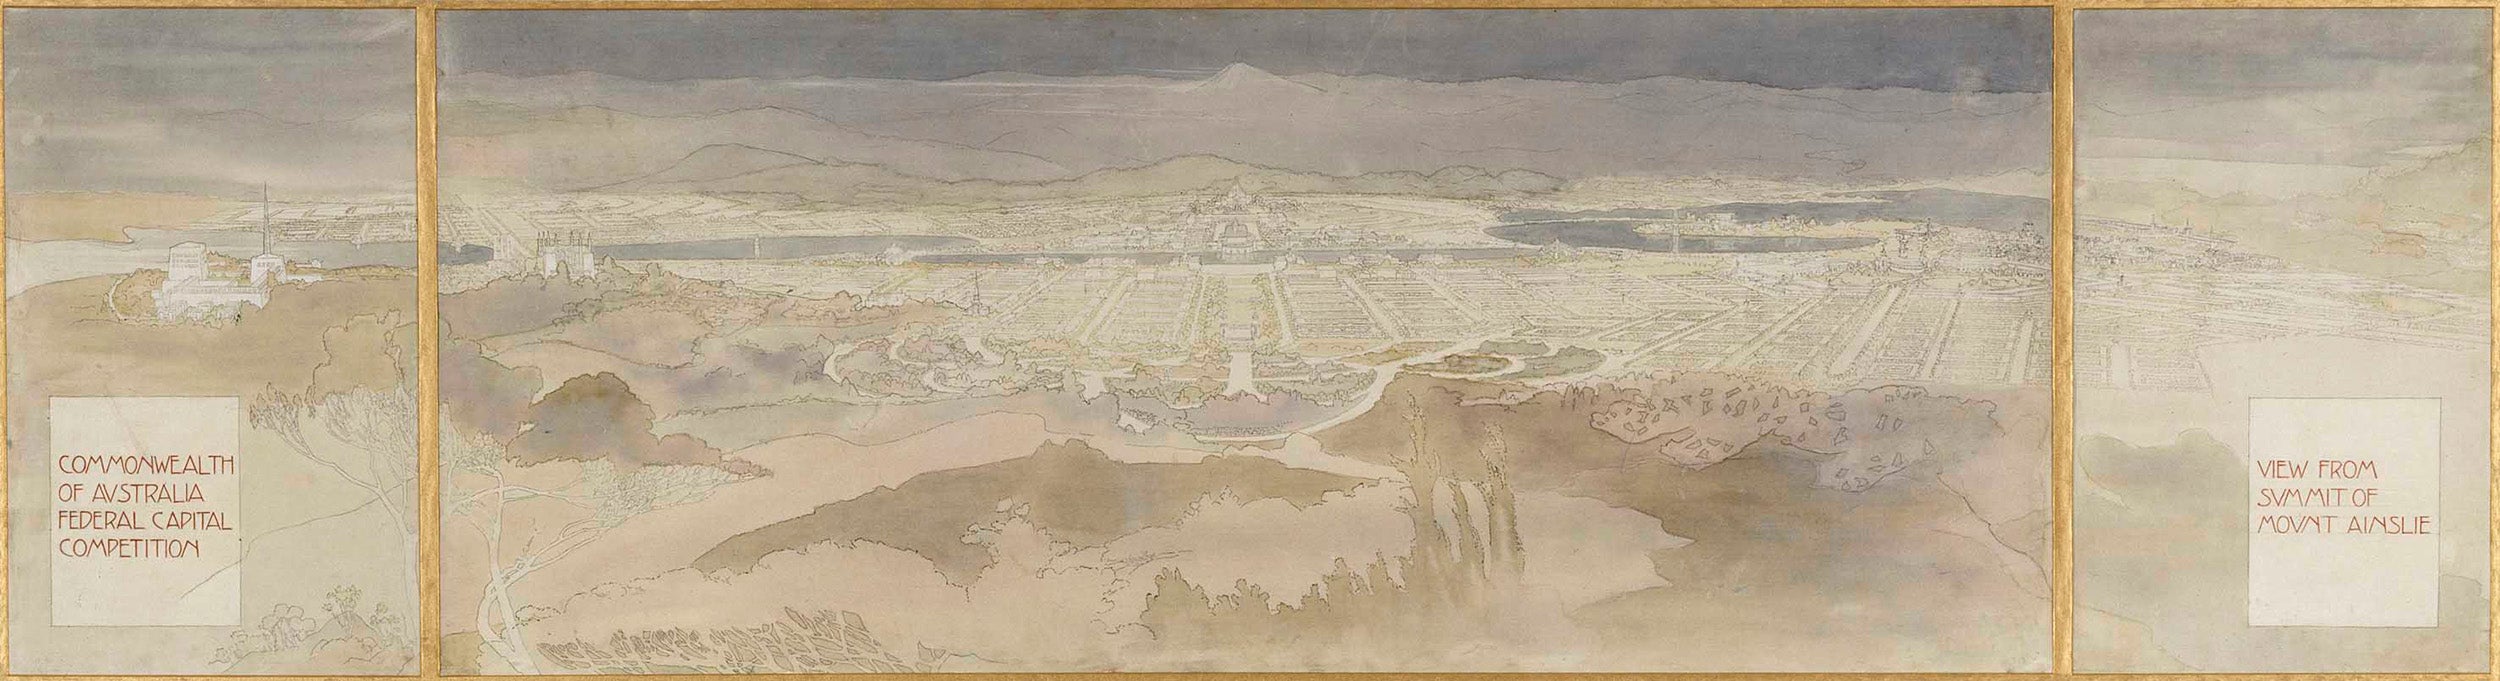 Canberra plan submitted to the Canberra design competition by Walter Burley Griffin